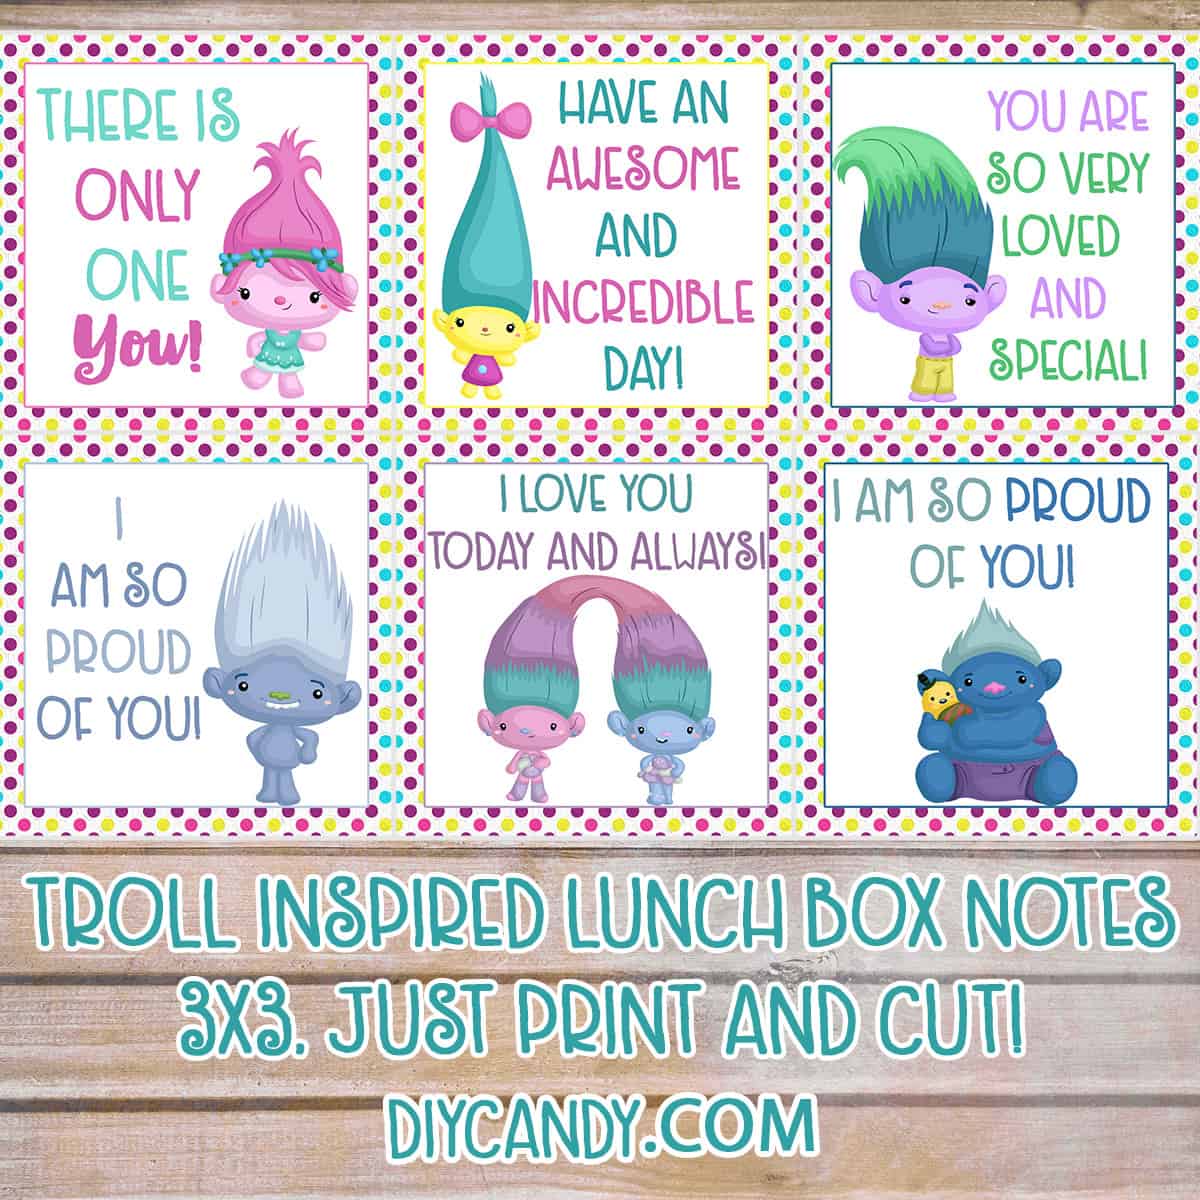 These Trolls printables lunchbox notes are inspired by the Dreamworks movie. Grab the free printable here and put a smile on your child's face!